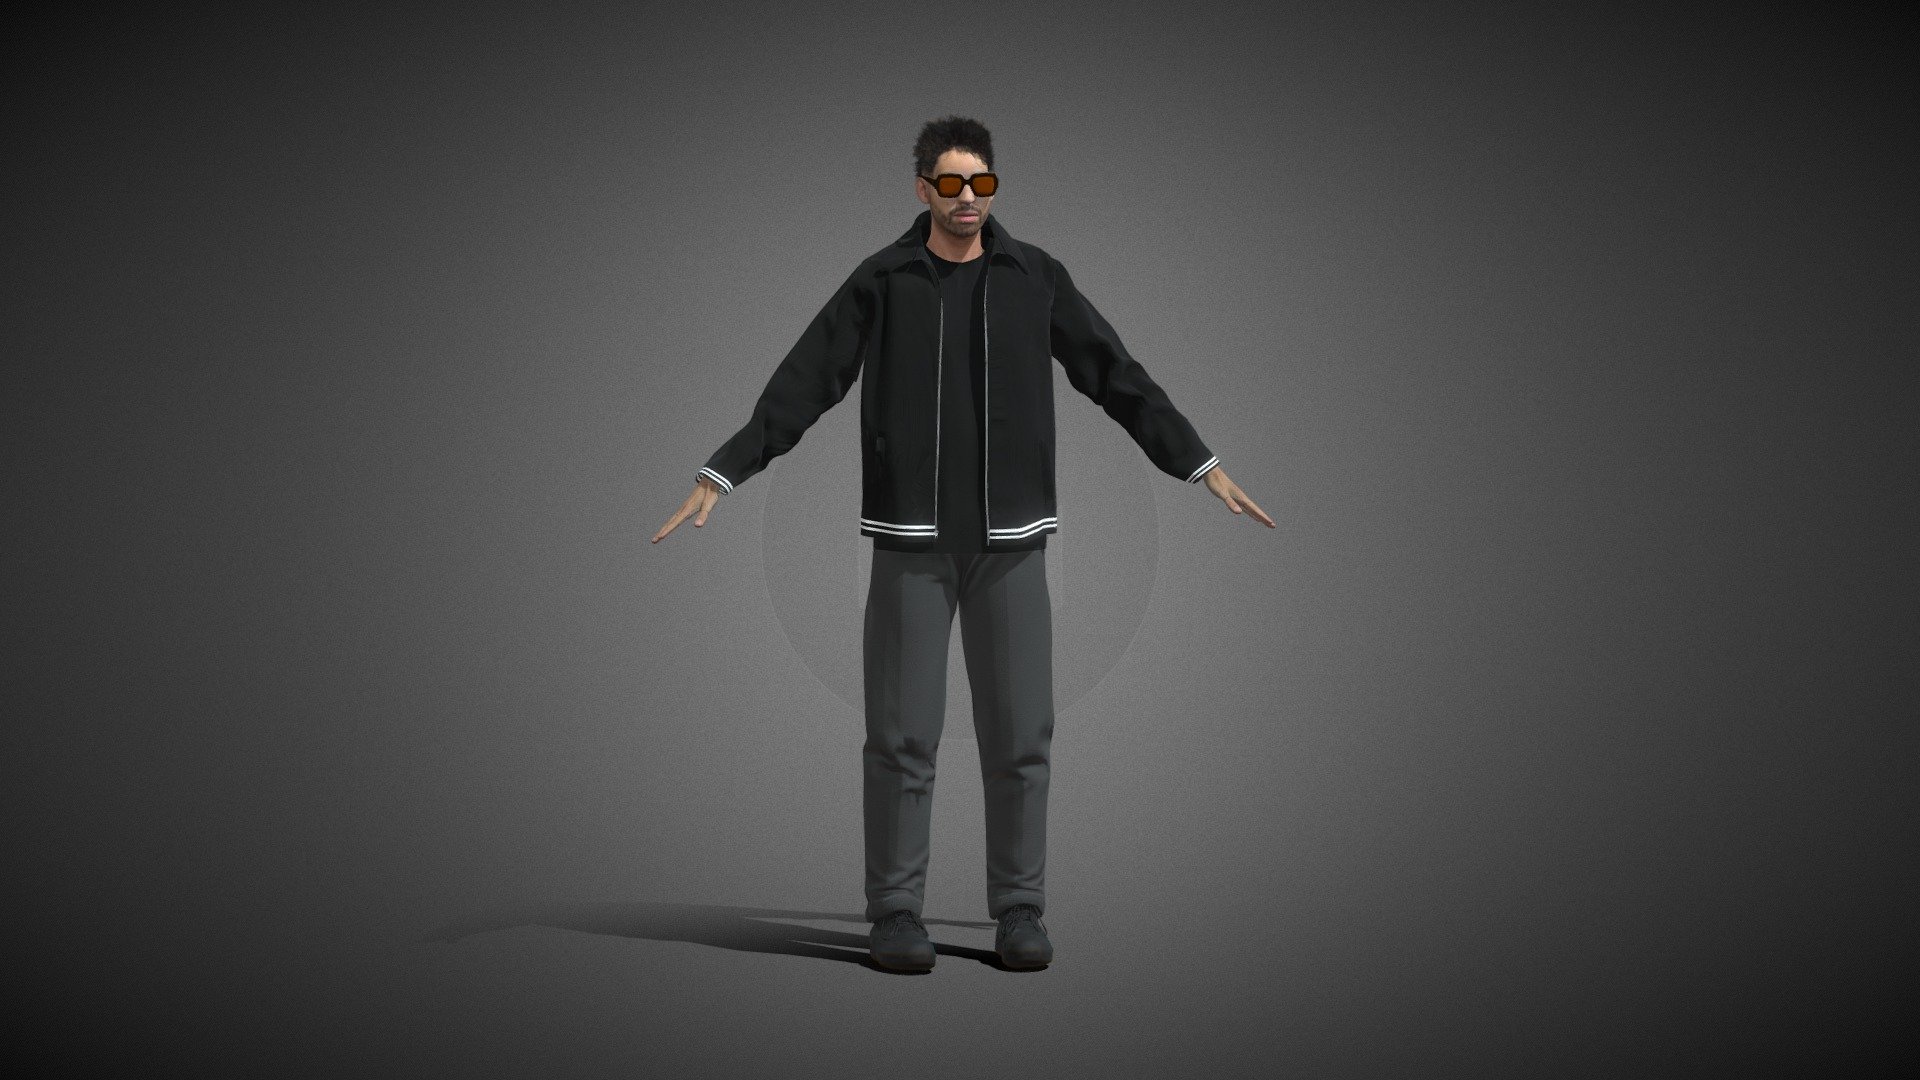 3D Model of JeanJass for our game Oktogone

I can create 3D models of all famous artists or custom characters.  You can send me a message on Instagram if you're interested &ndash;&gt; https://www.instagram.com/valone.future/ - JeanJass - 3D model by ValOne 3d model